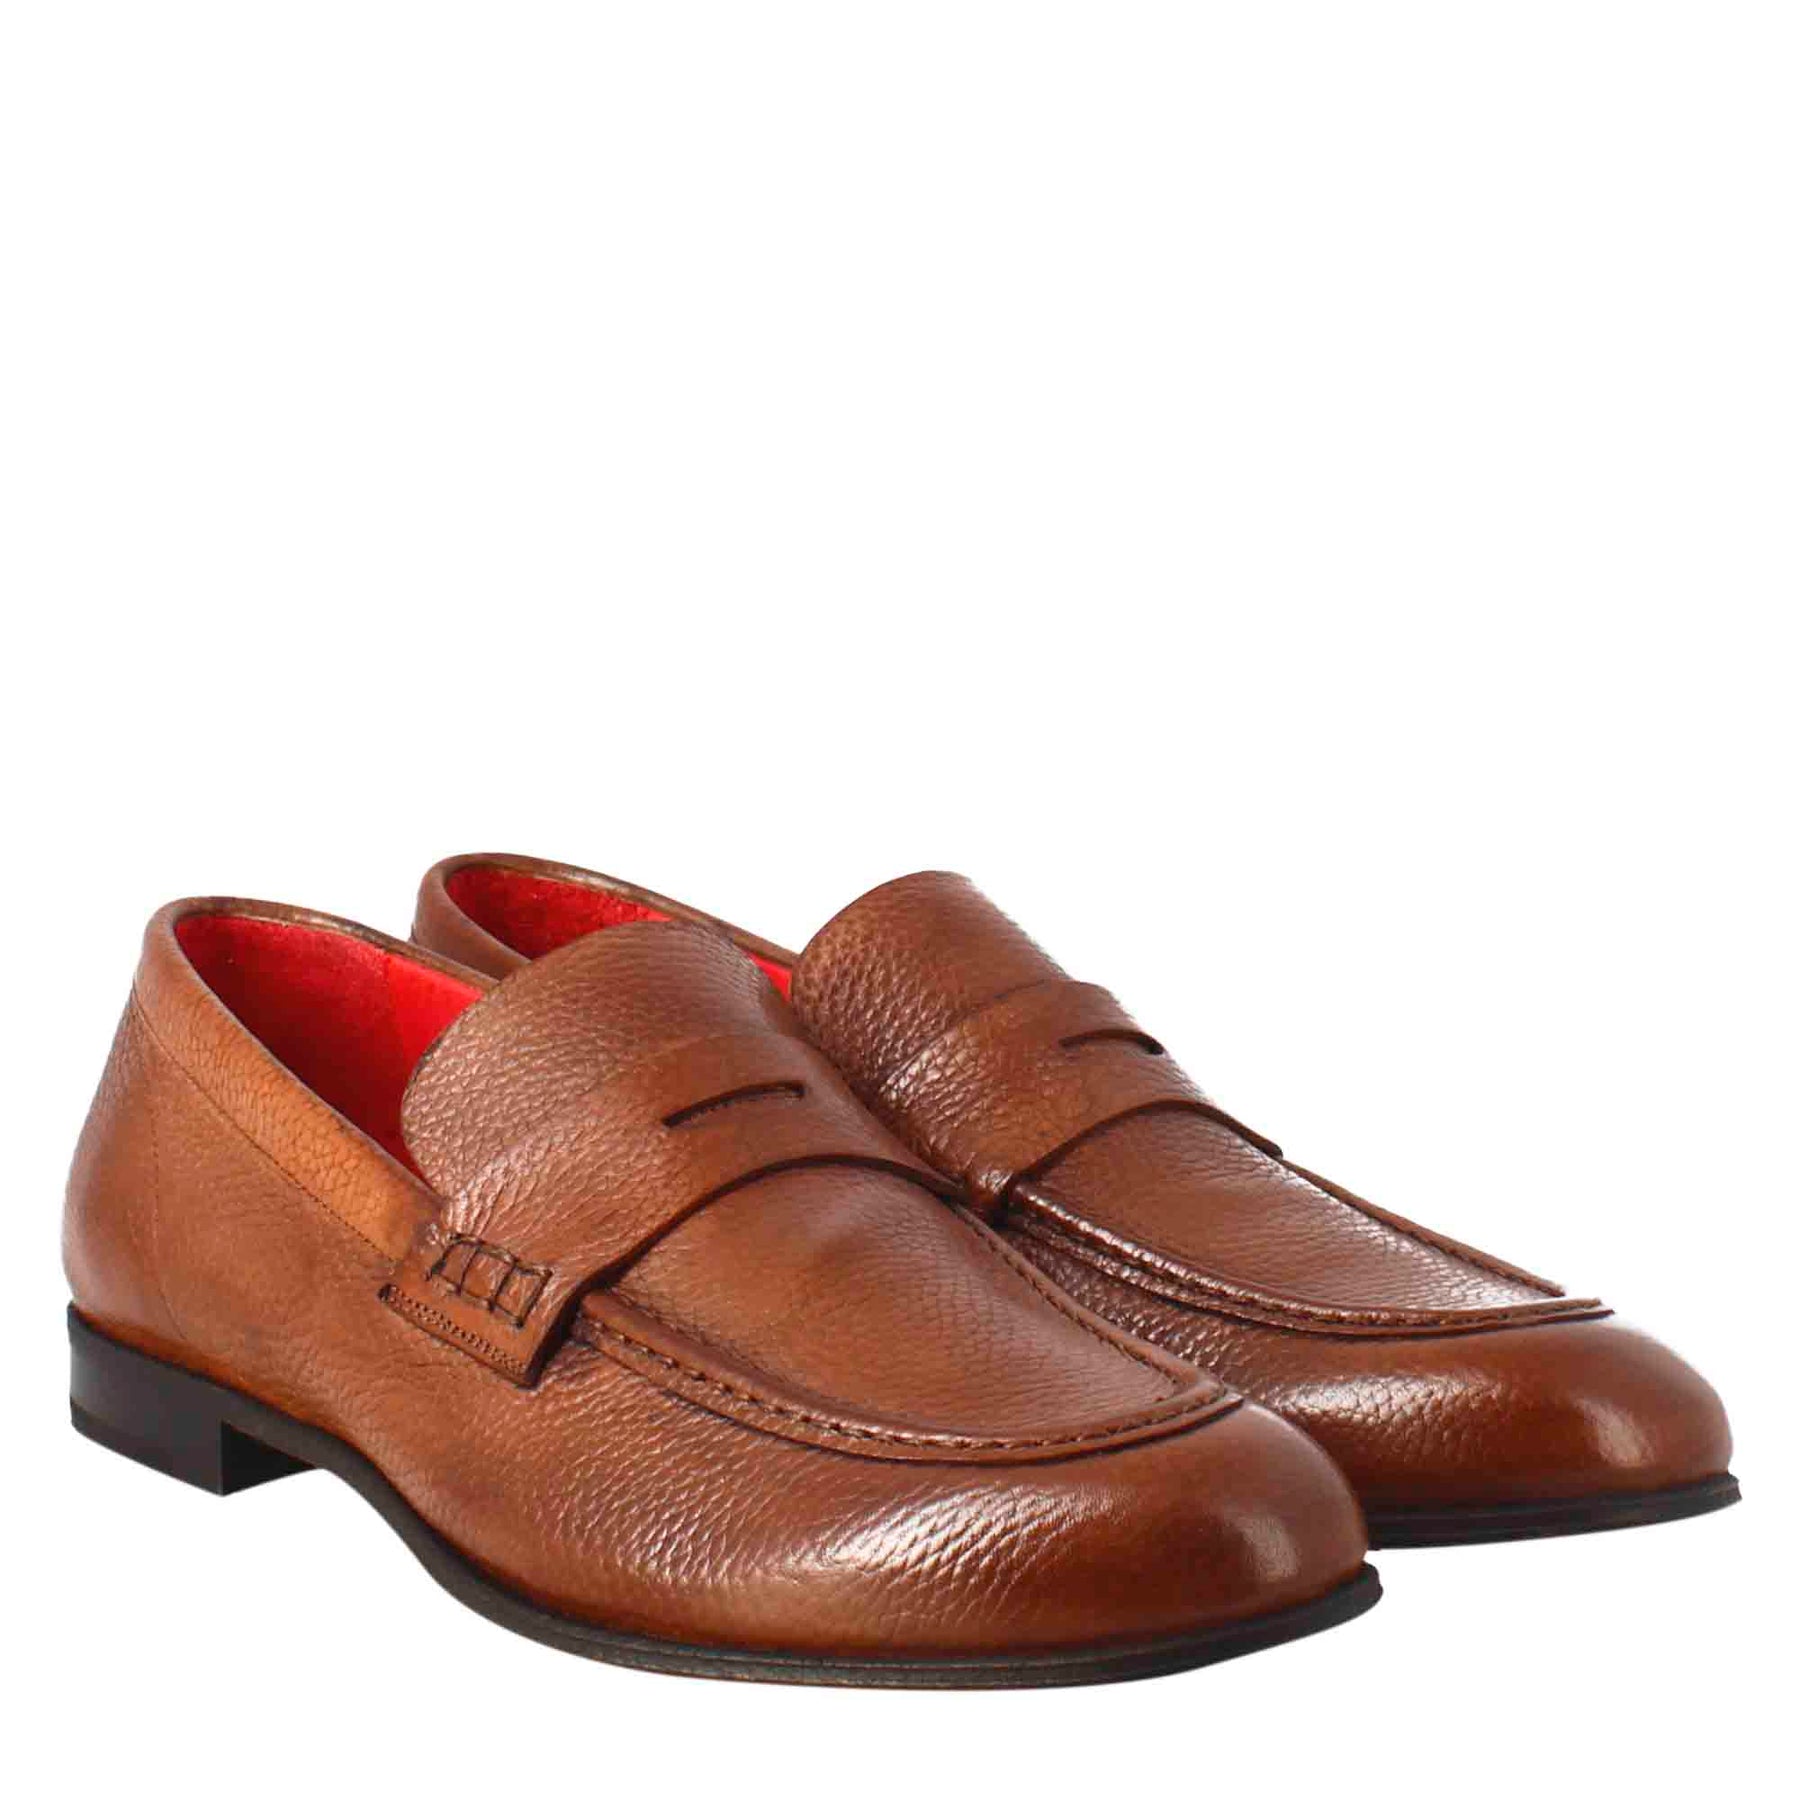 Classy Brown Leather Moccasin Shoes for Men, Men Brown Leather Loafer Shoes